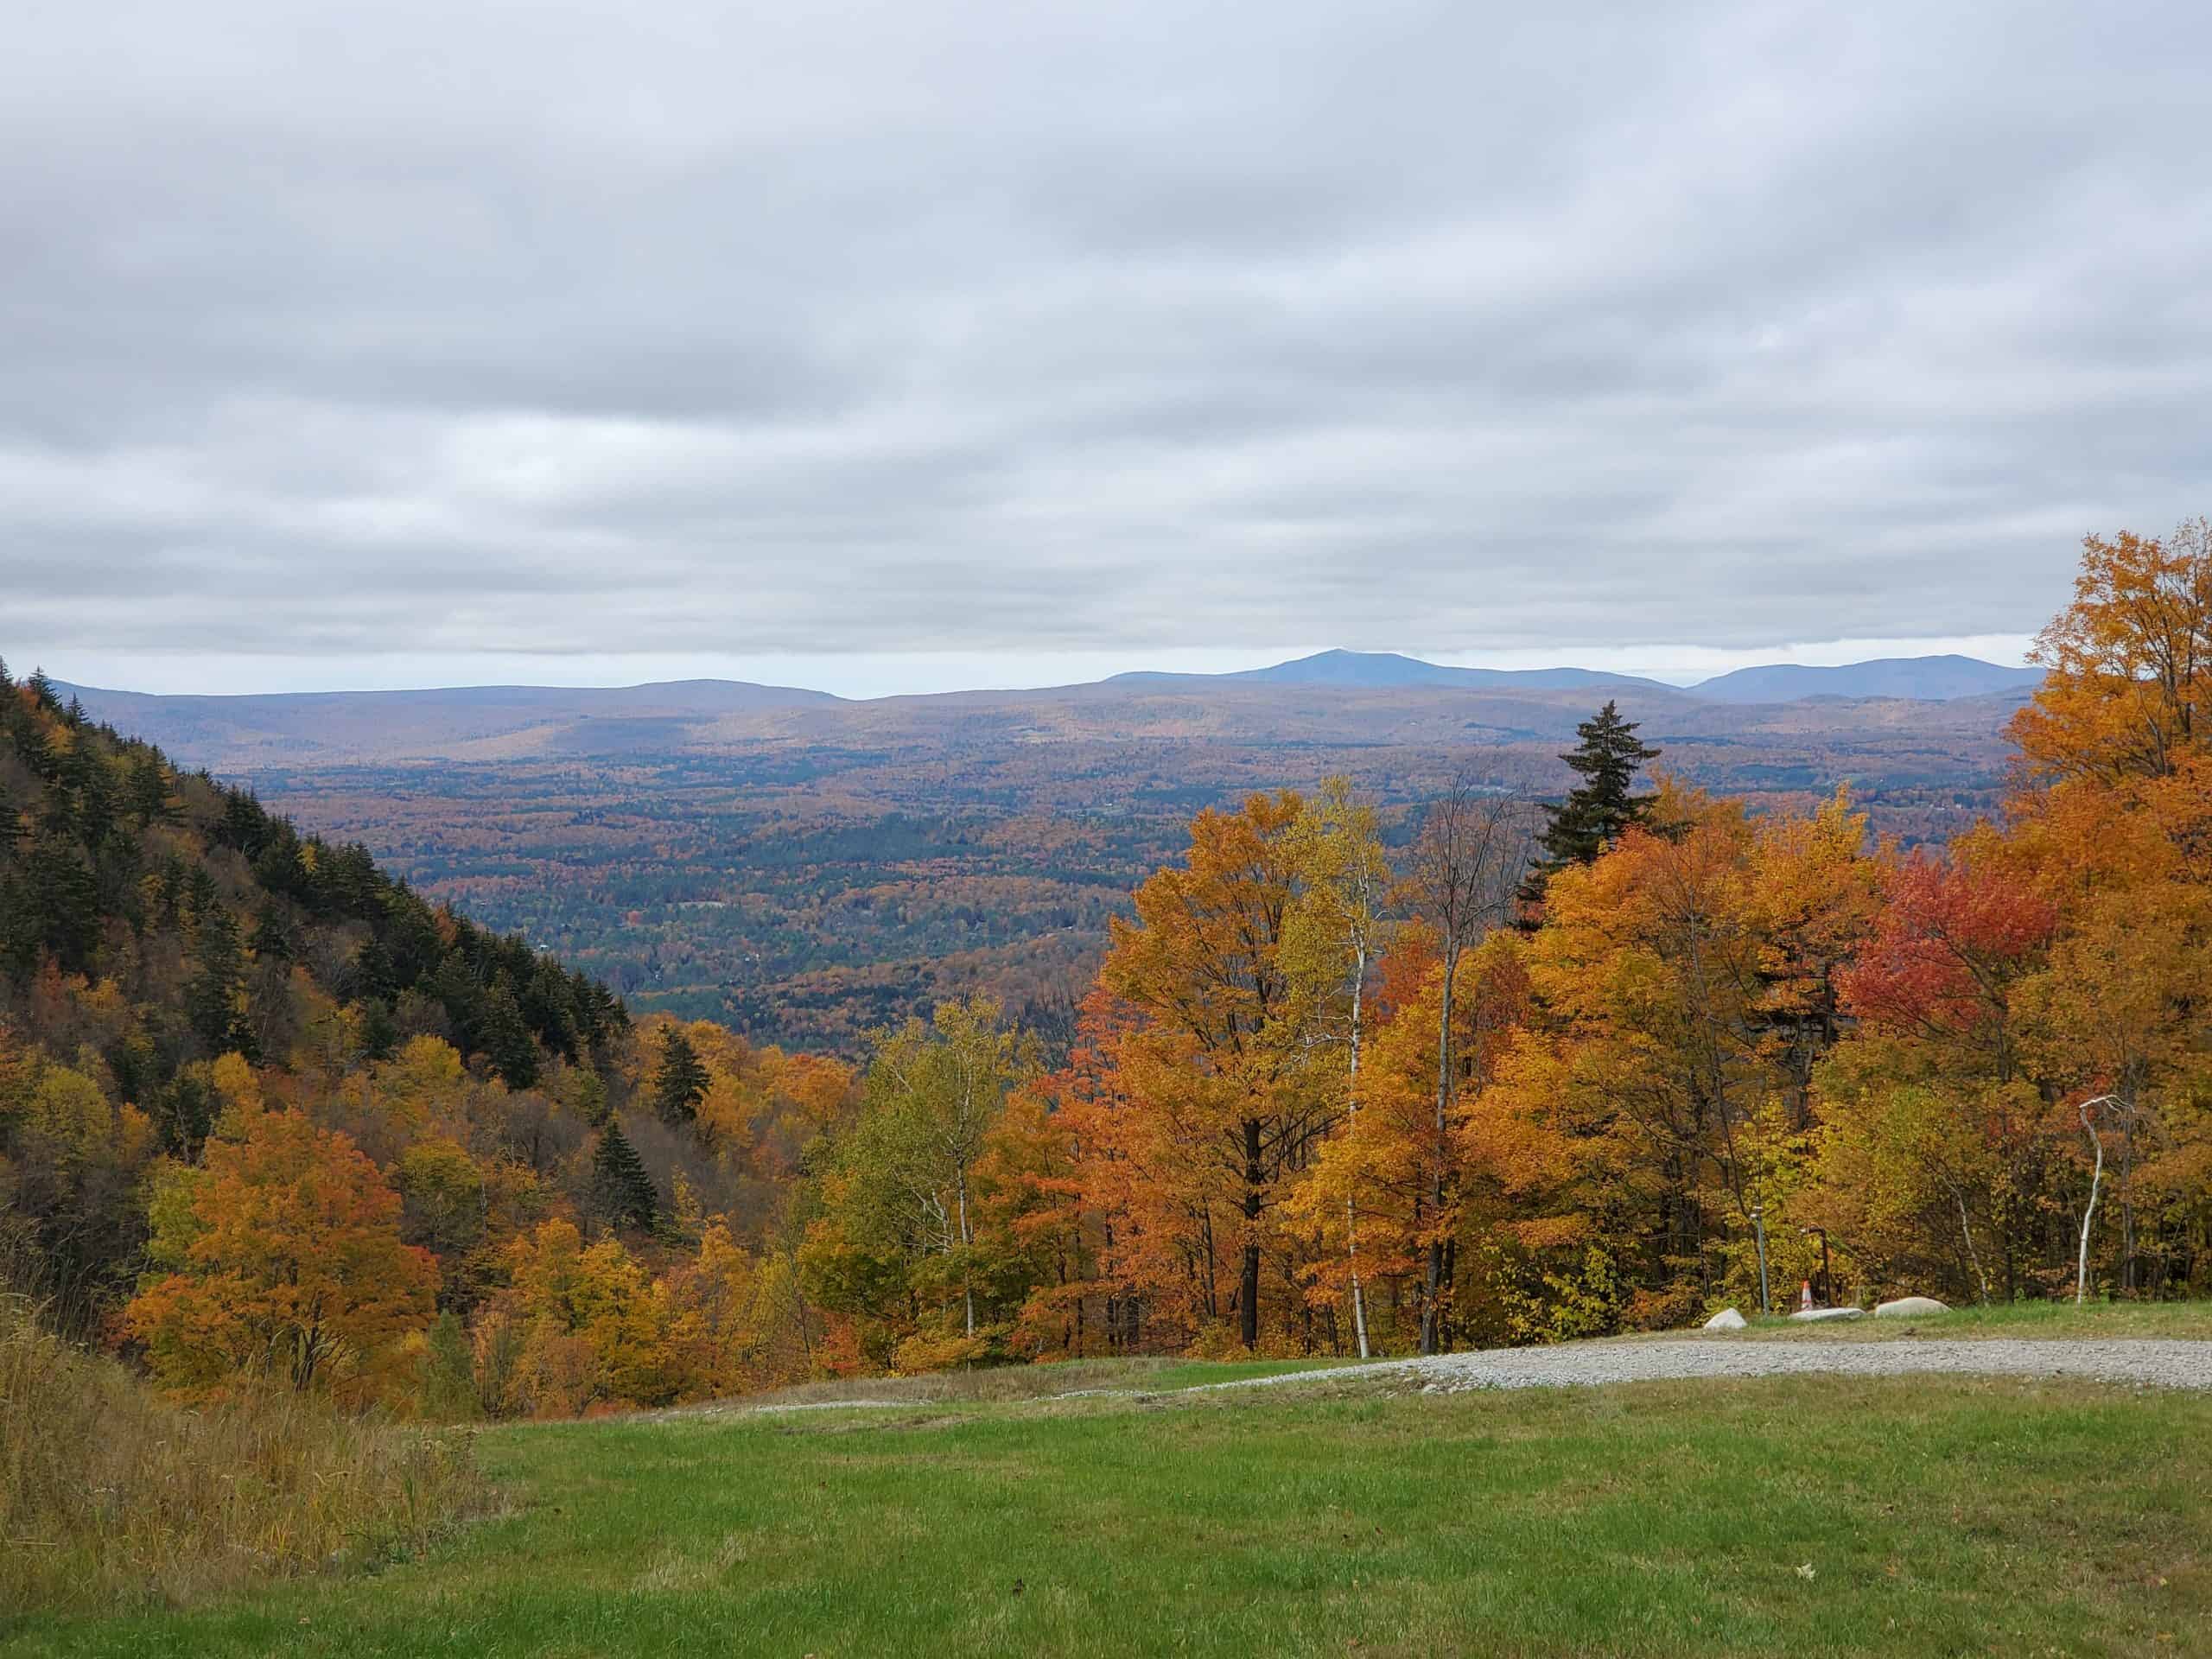 2019/10/12 - View from Magic Mountain in Londonderry, VT - by Renee-Marie Smith